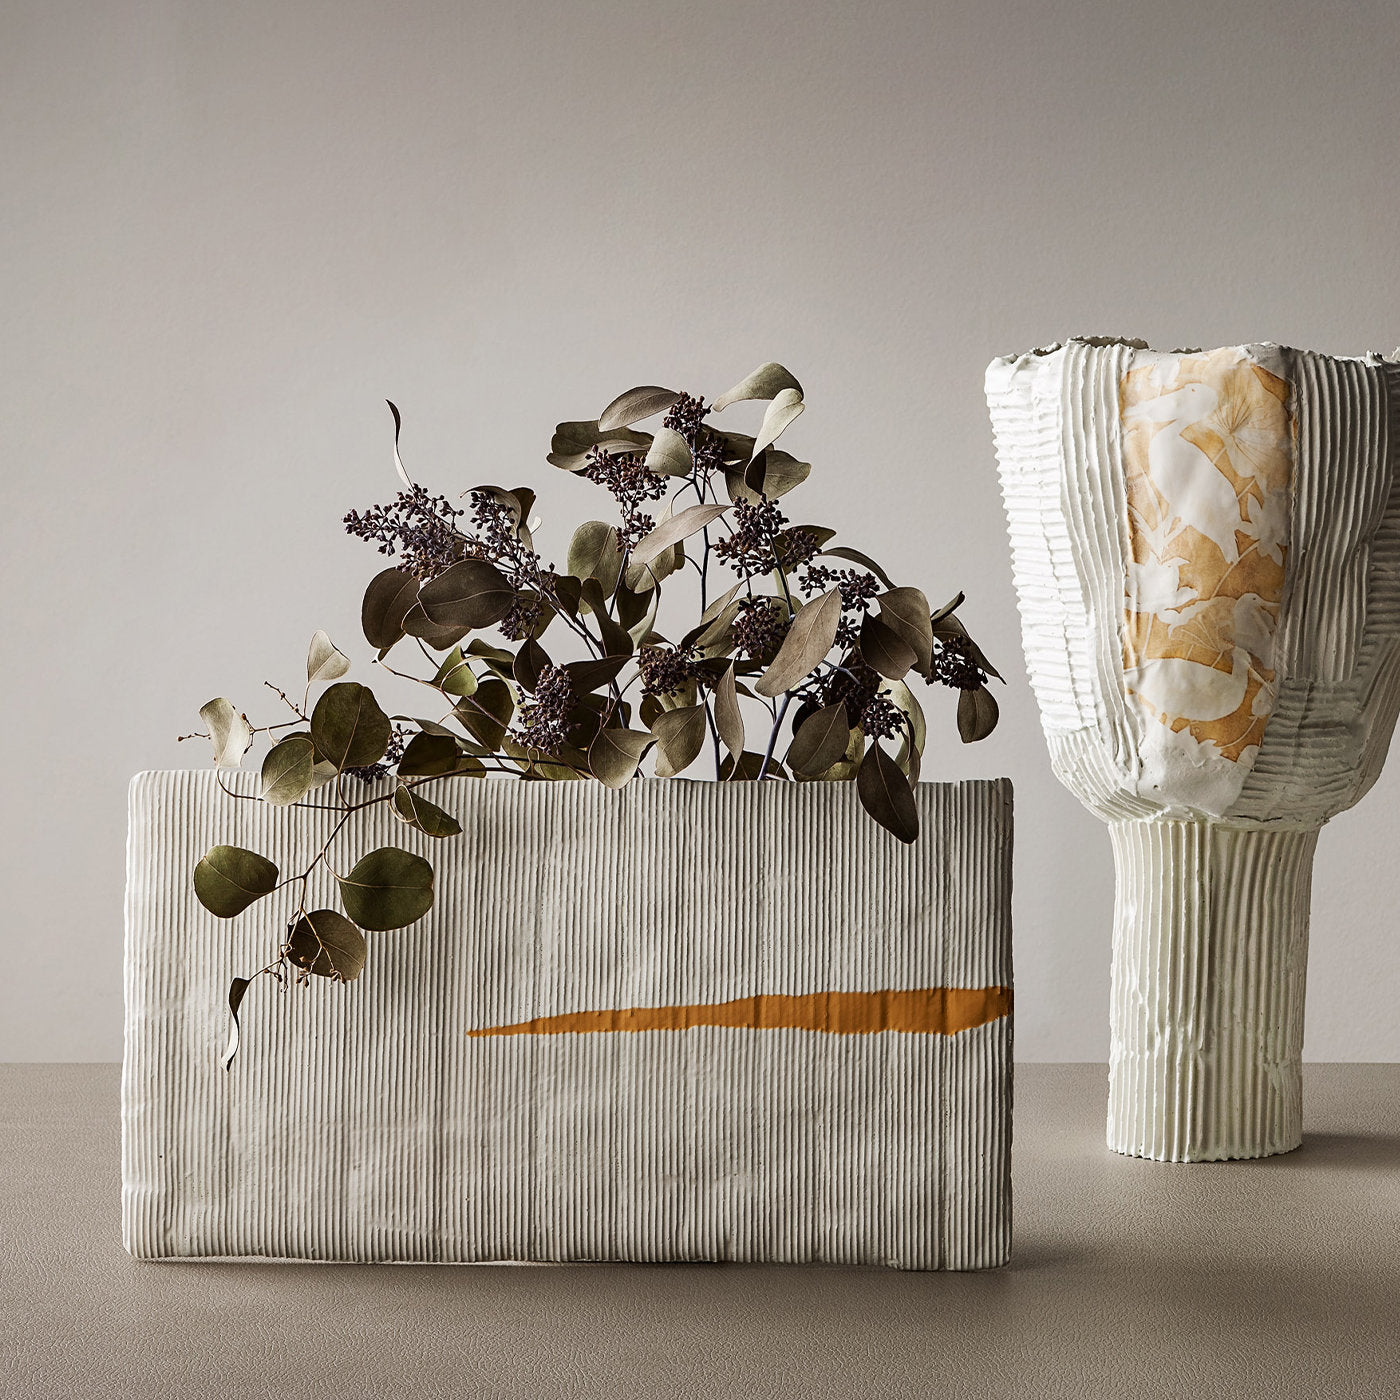 Cartocci Surprise White and Rust Vase - Alternative view 2